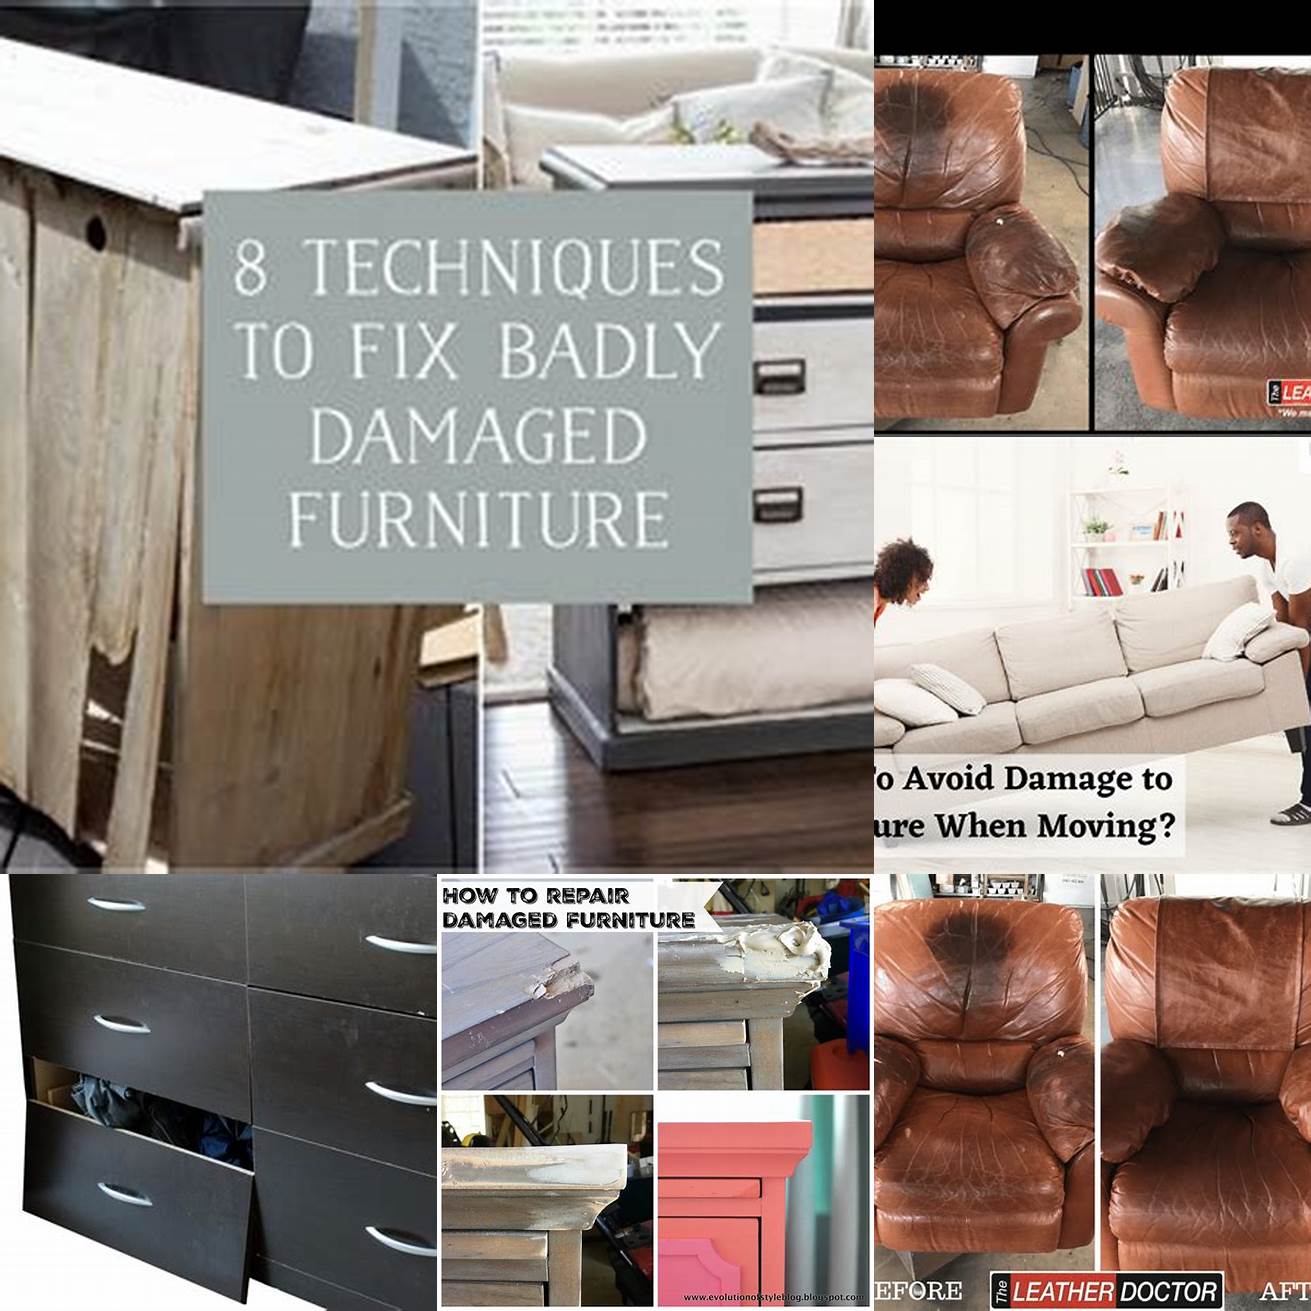 Regularly inspect your furniture for damage